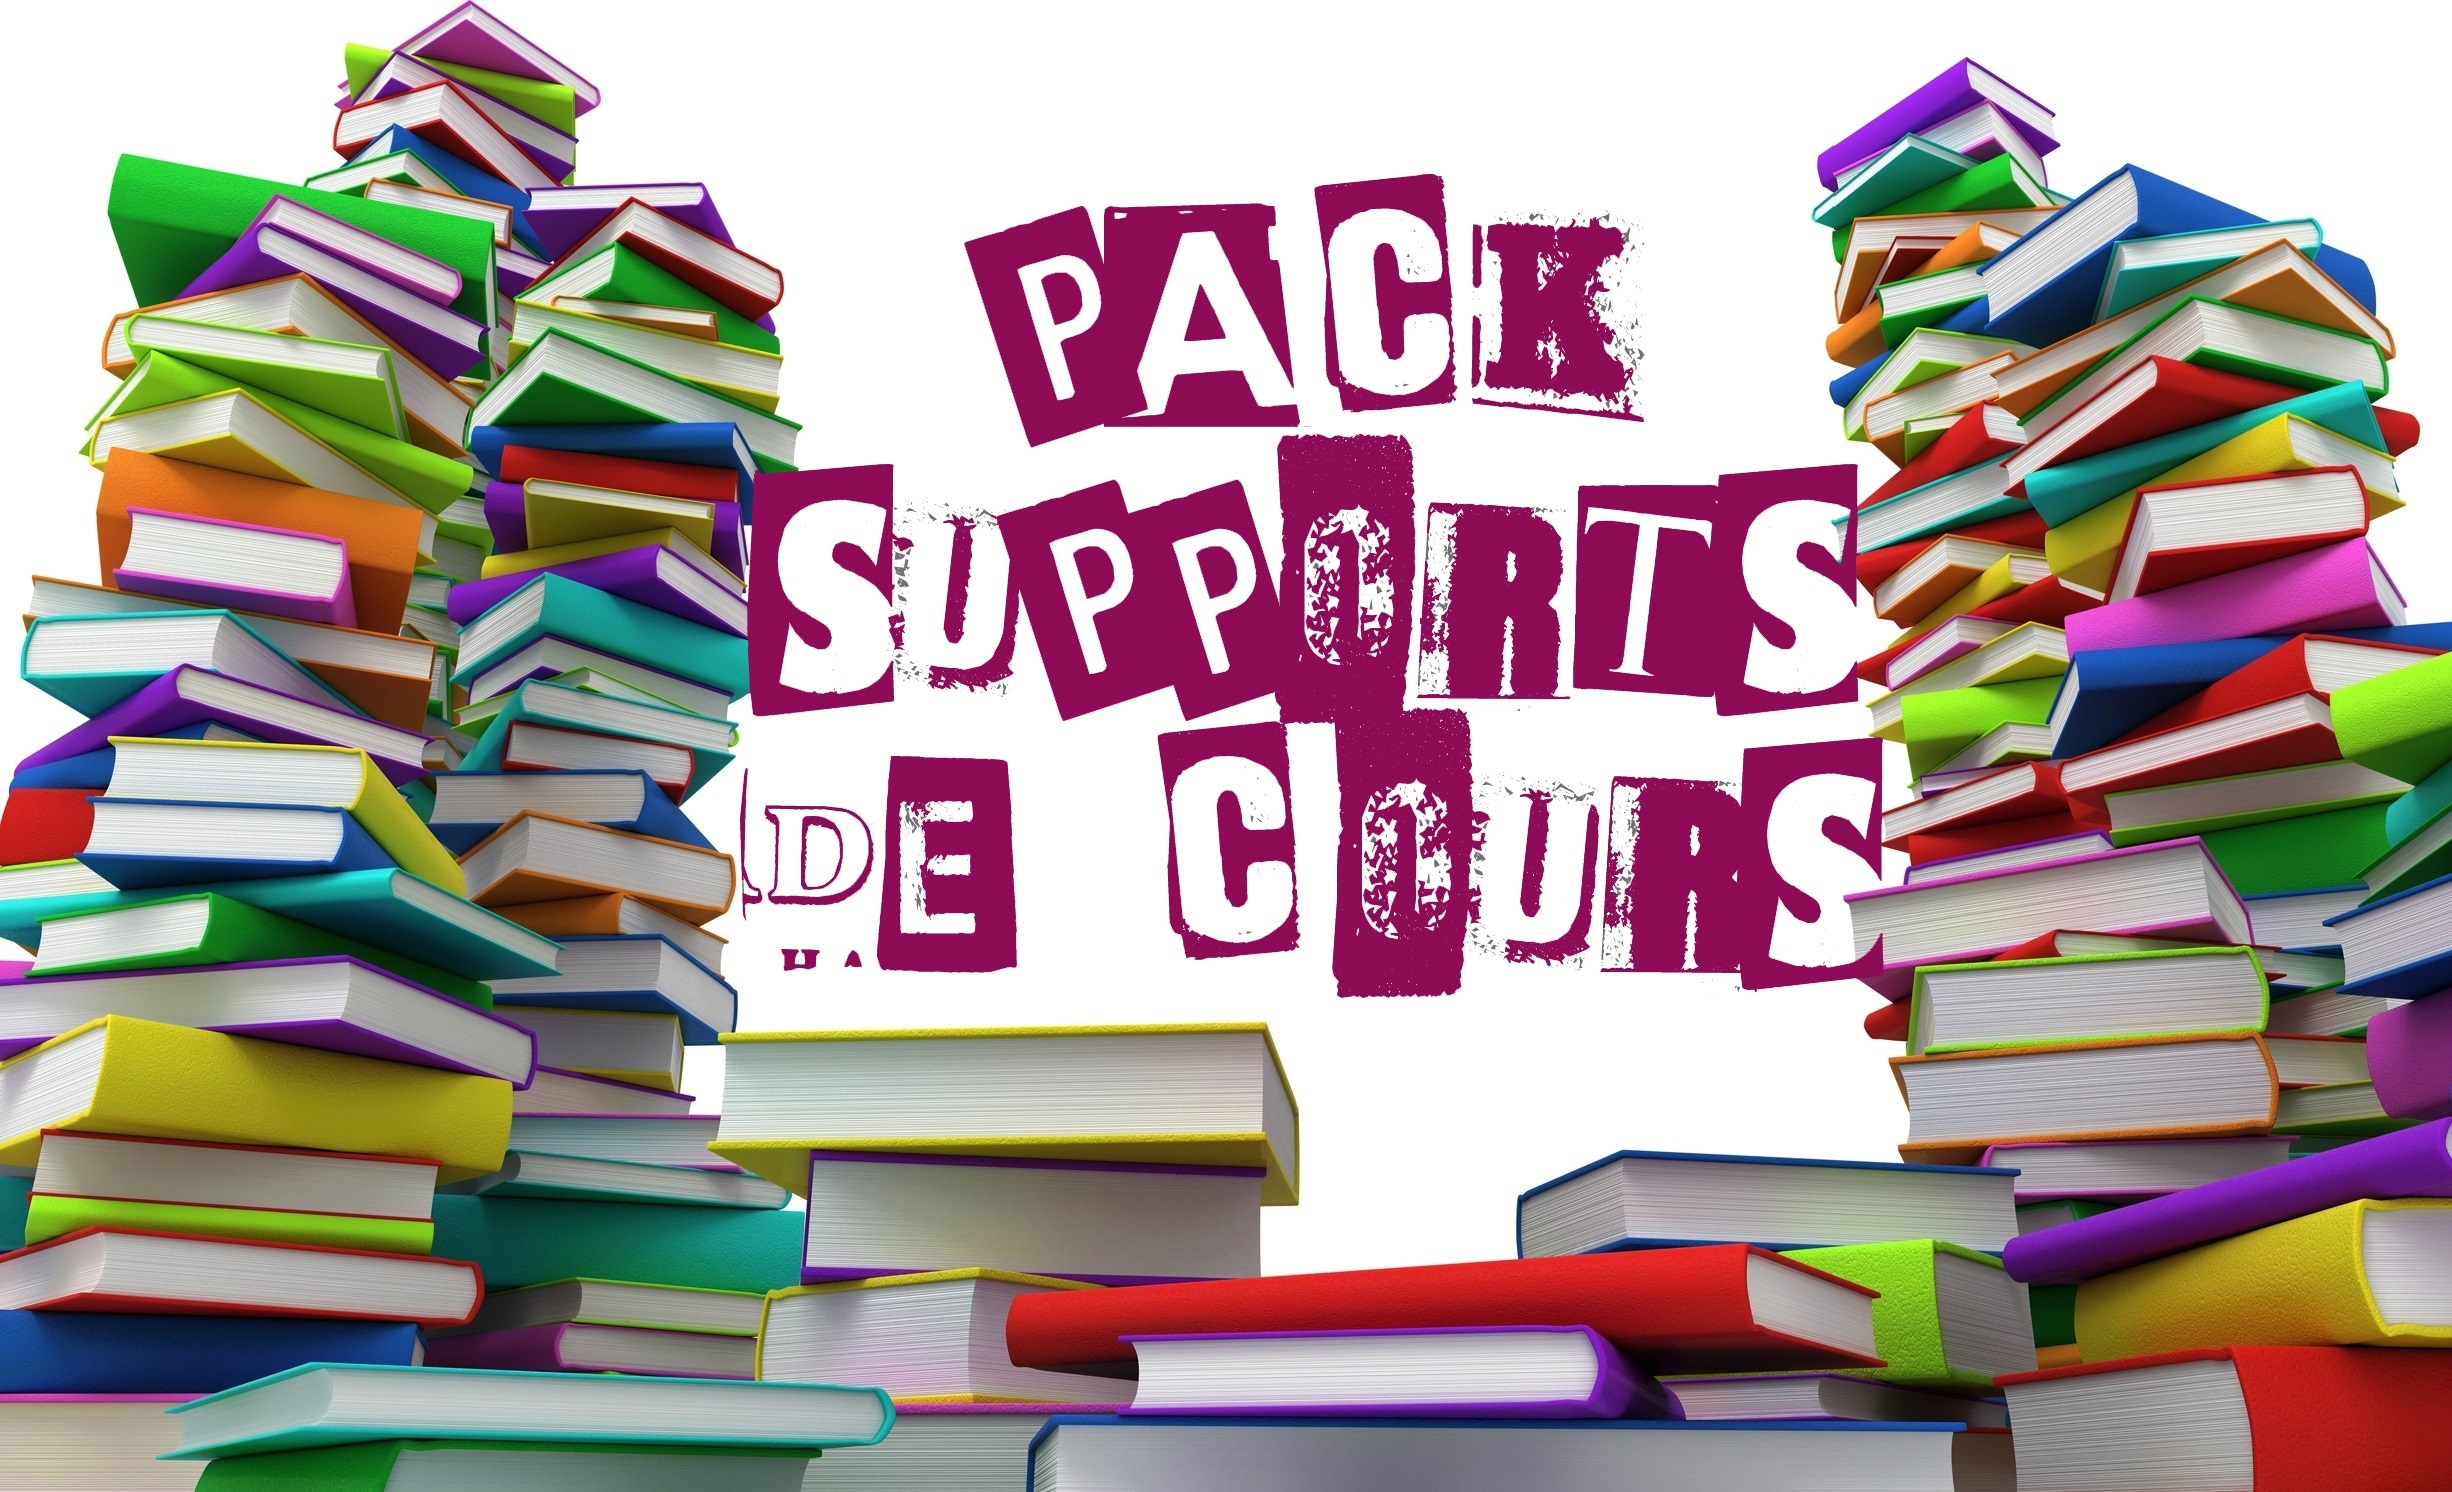 Pack Supports de cours S1 2016-2017